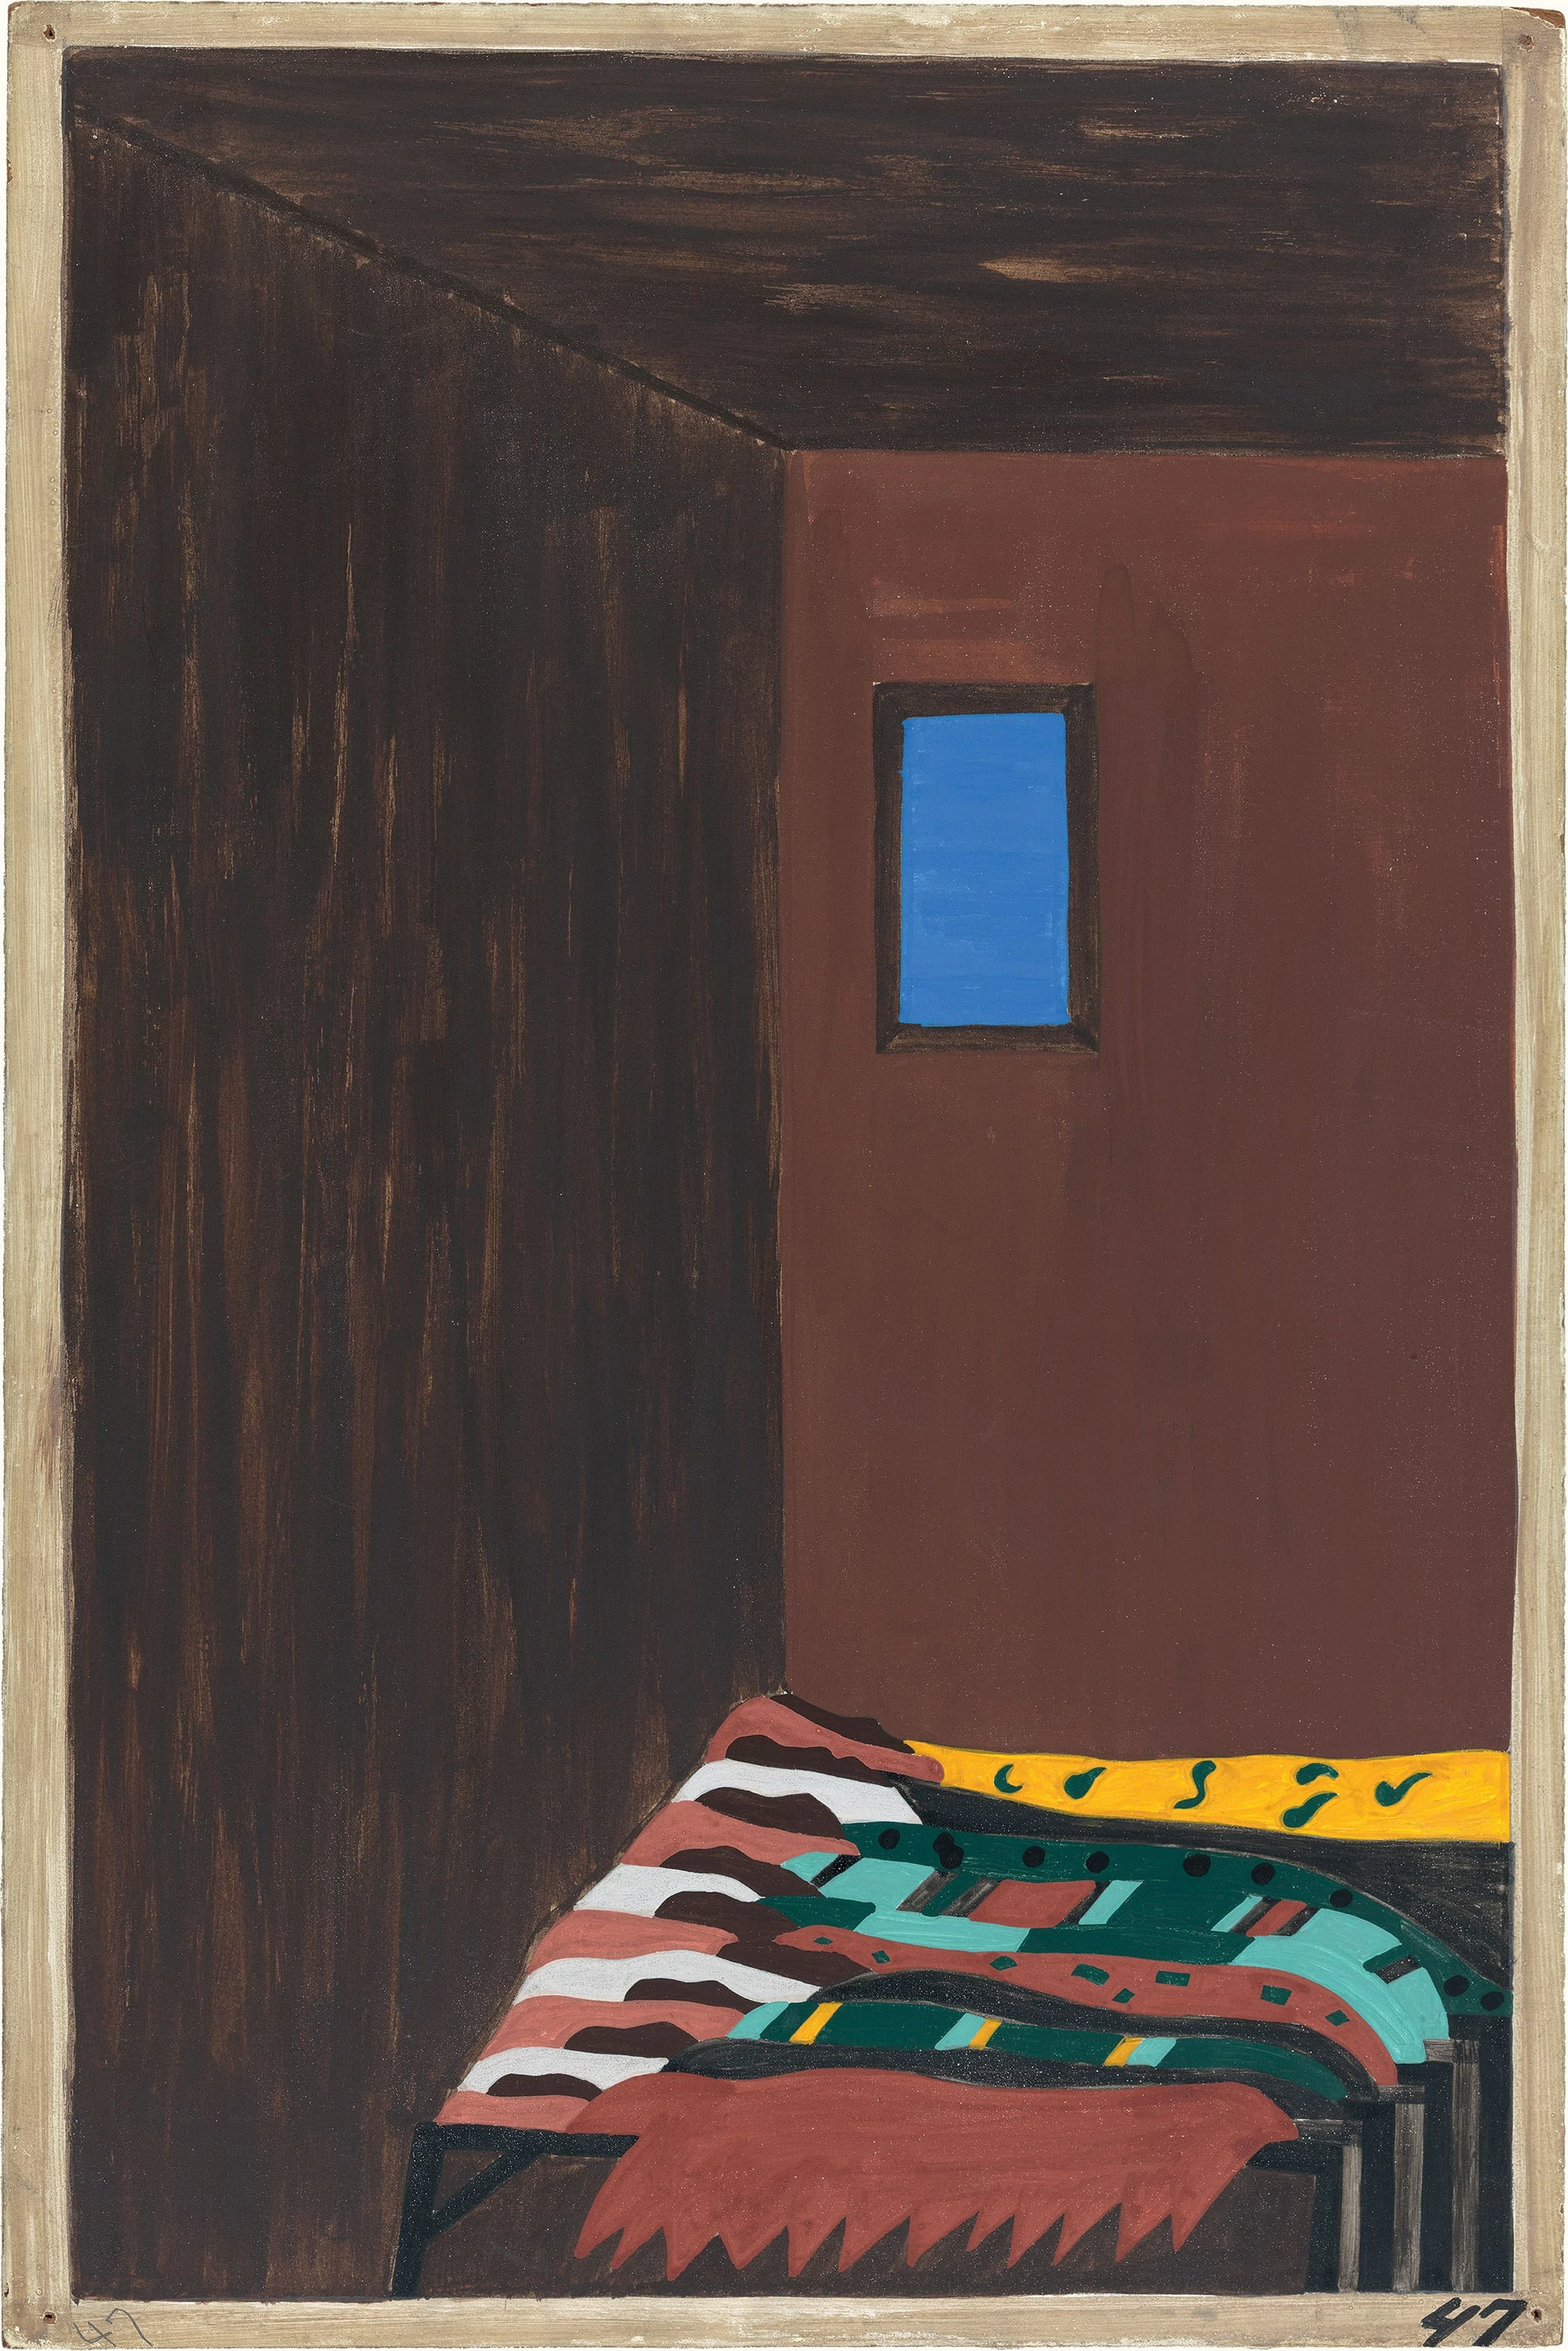 Migration Series No.47: As the migrant population grew, good housing became scarce. Workers were forced to live in overcrowded and dilapidated tenement houses, Jacob Lawrence